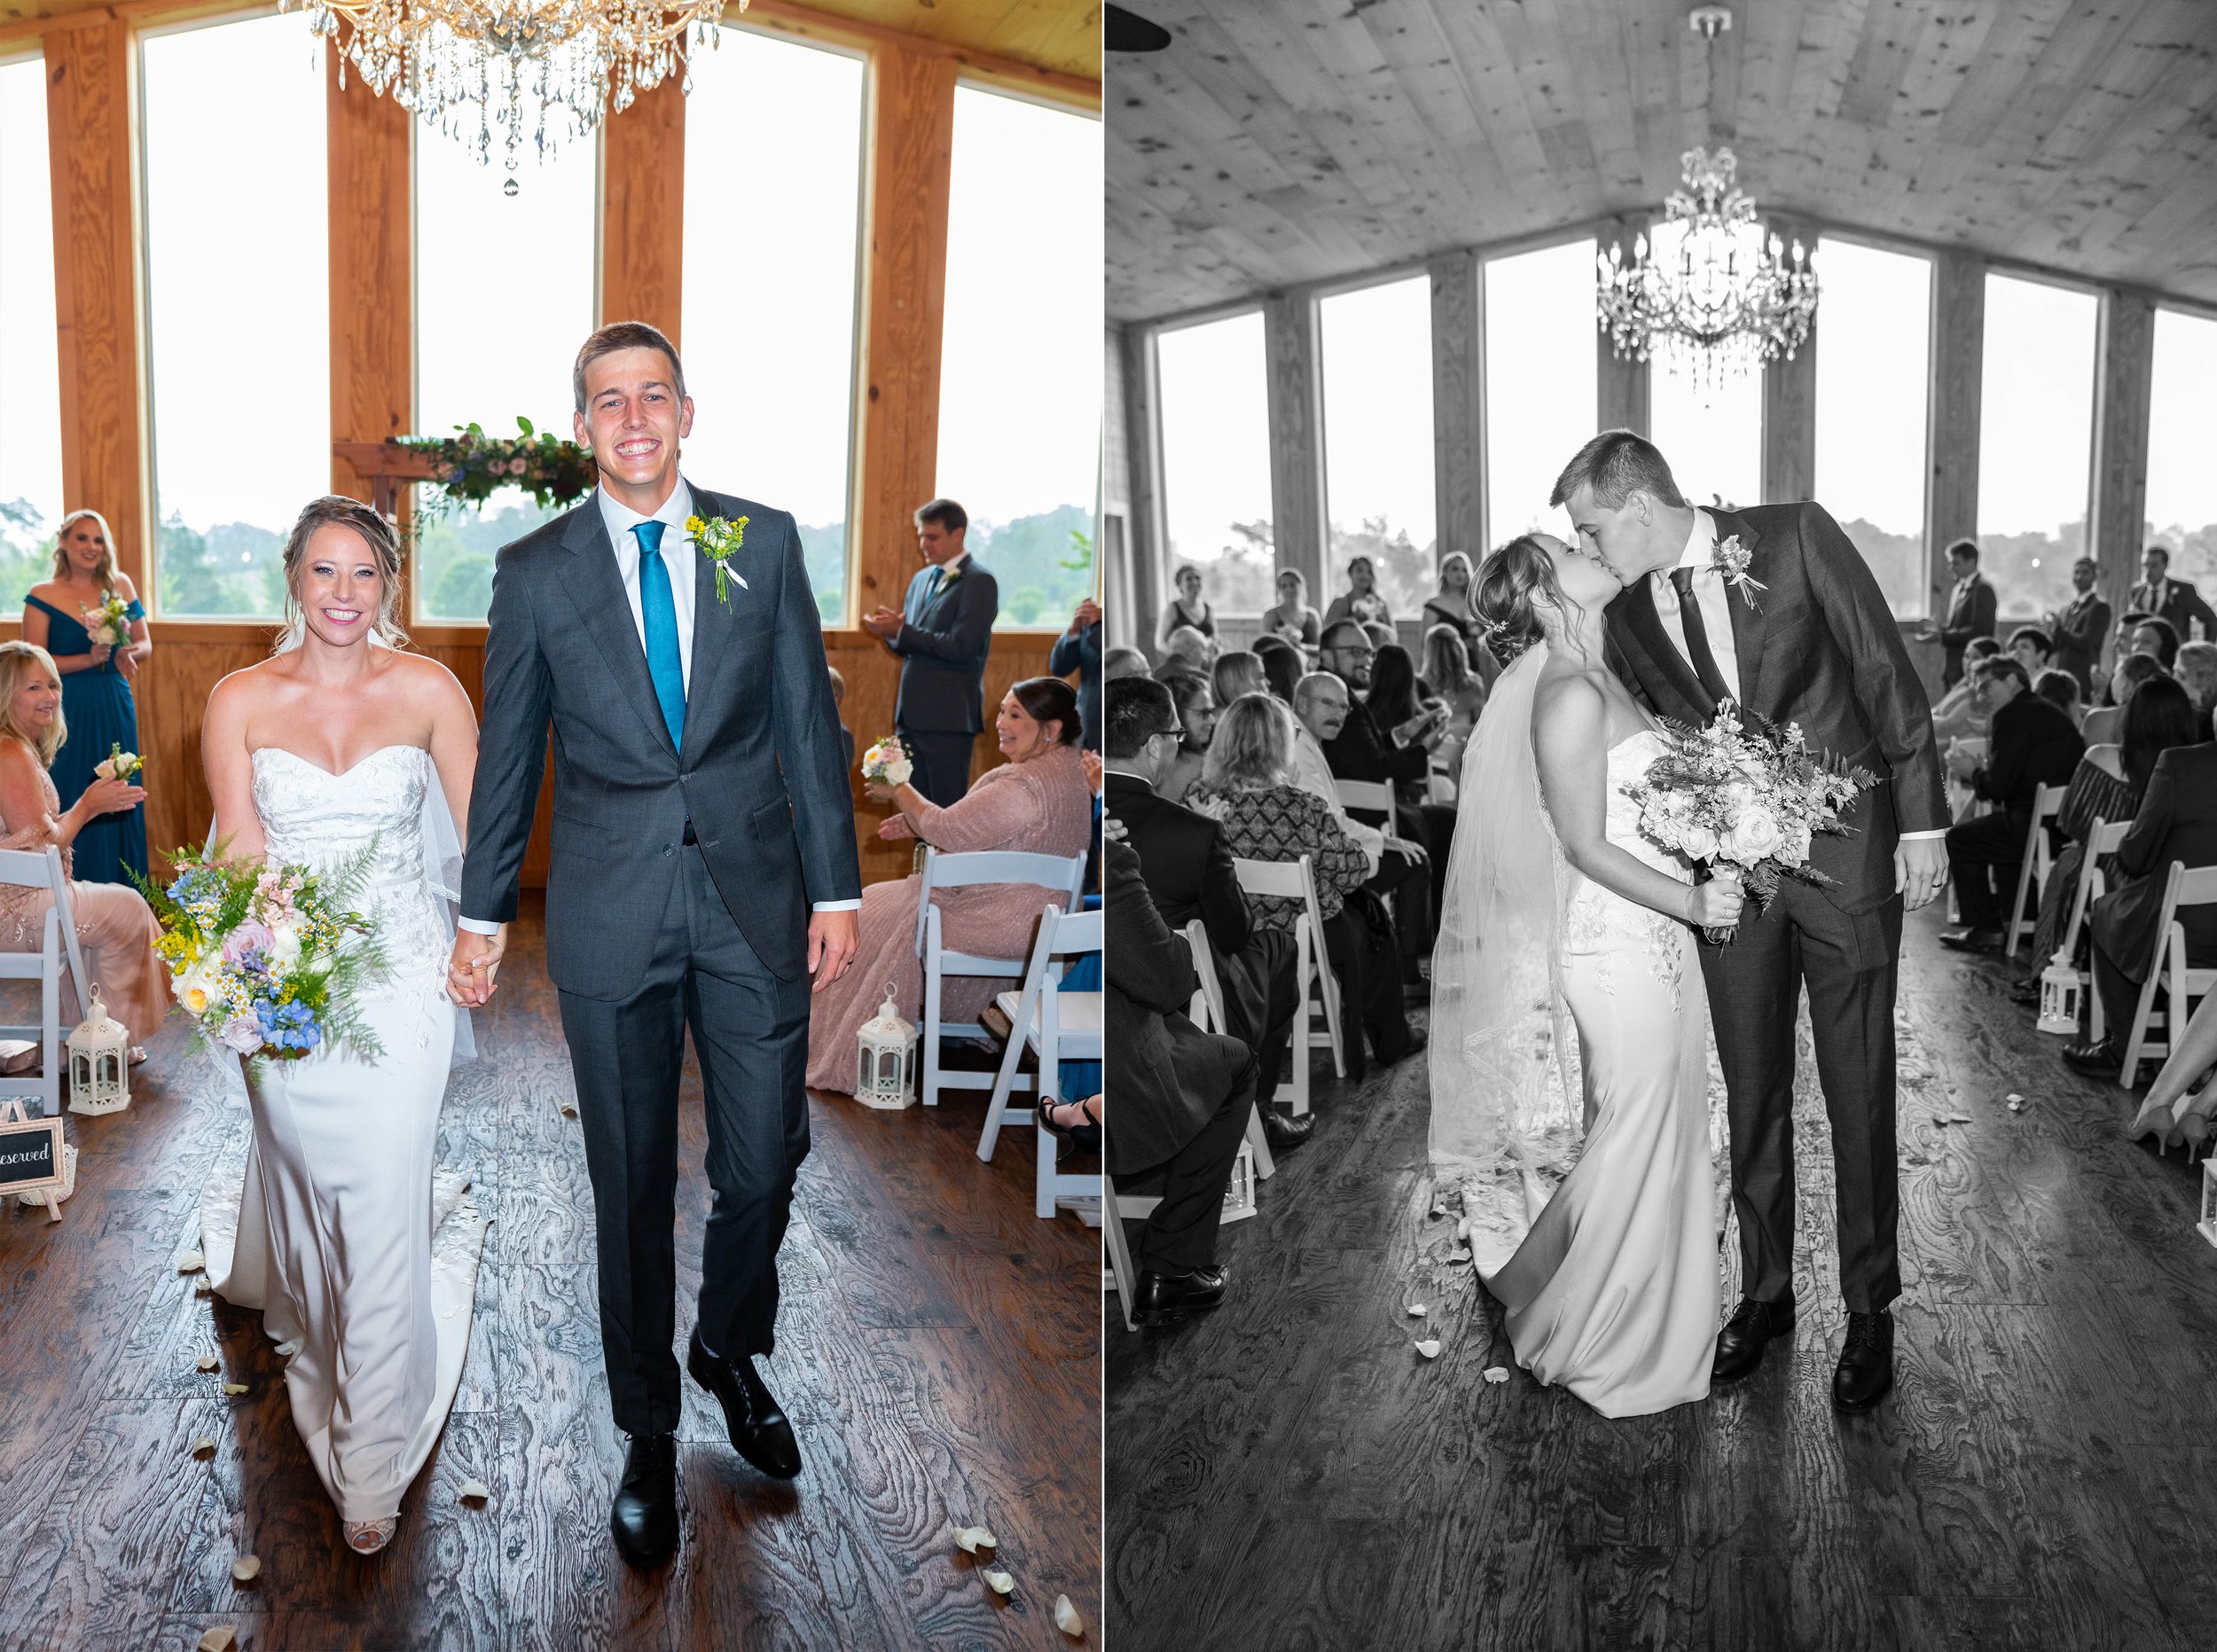 Bride and groom walk down the aisle at Stover Hall wedding ceremony